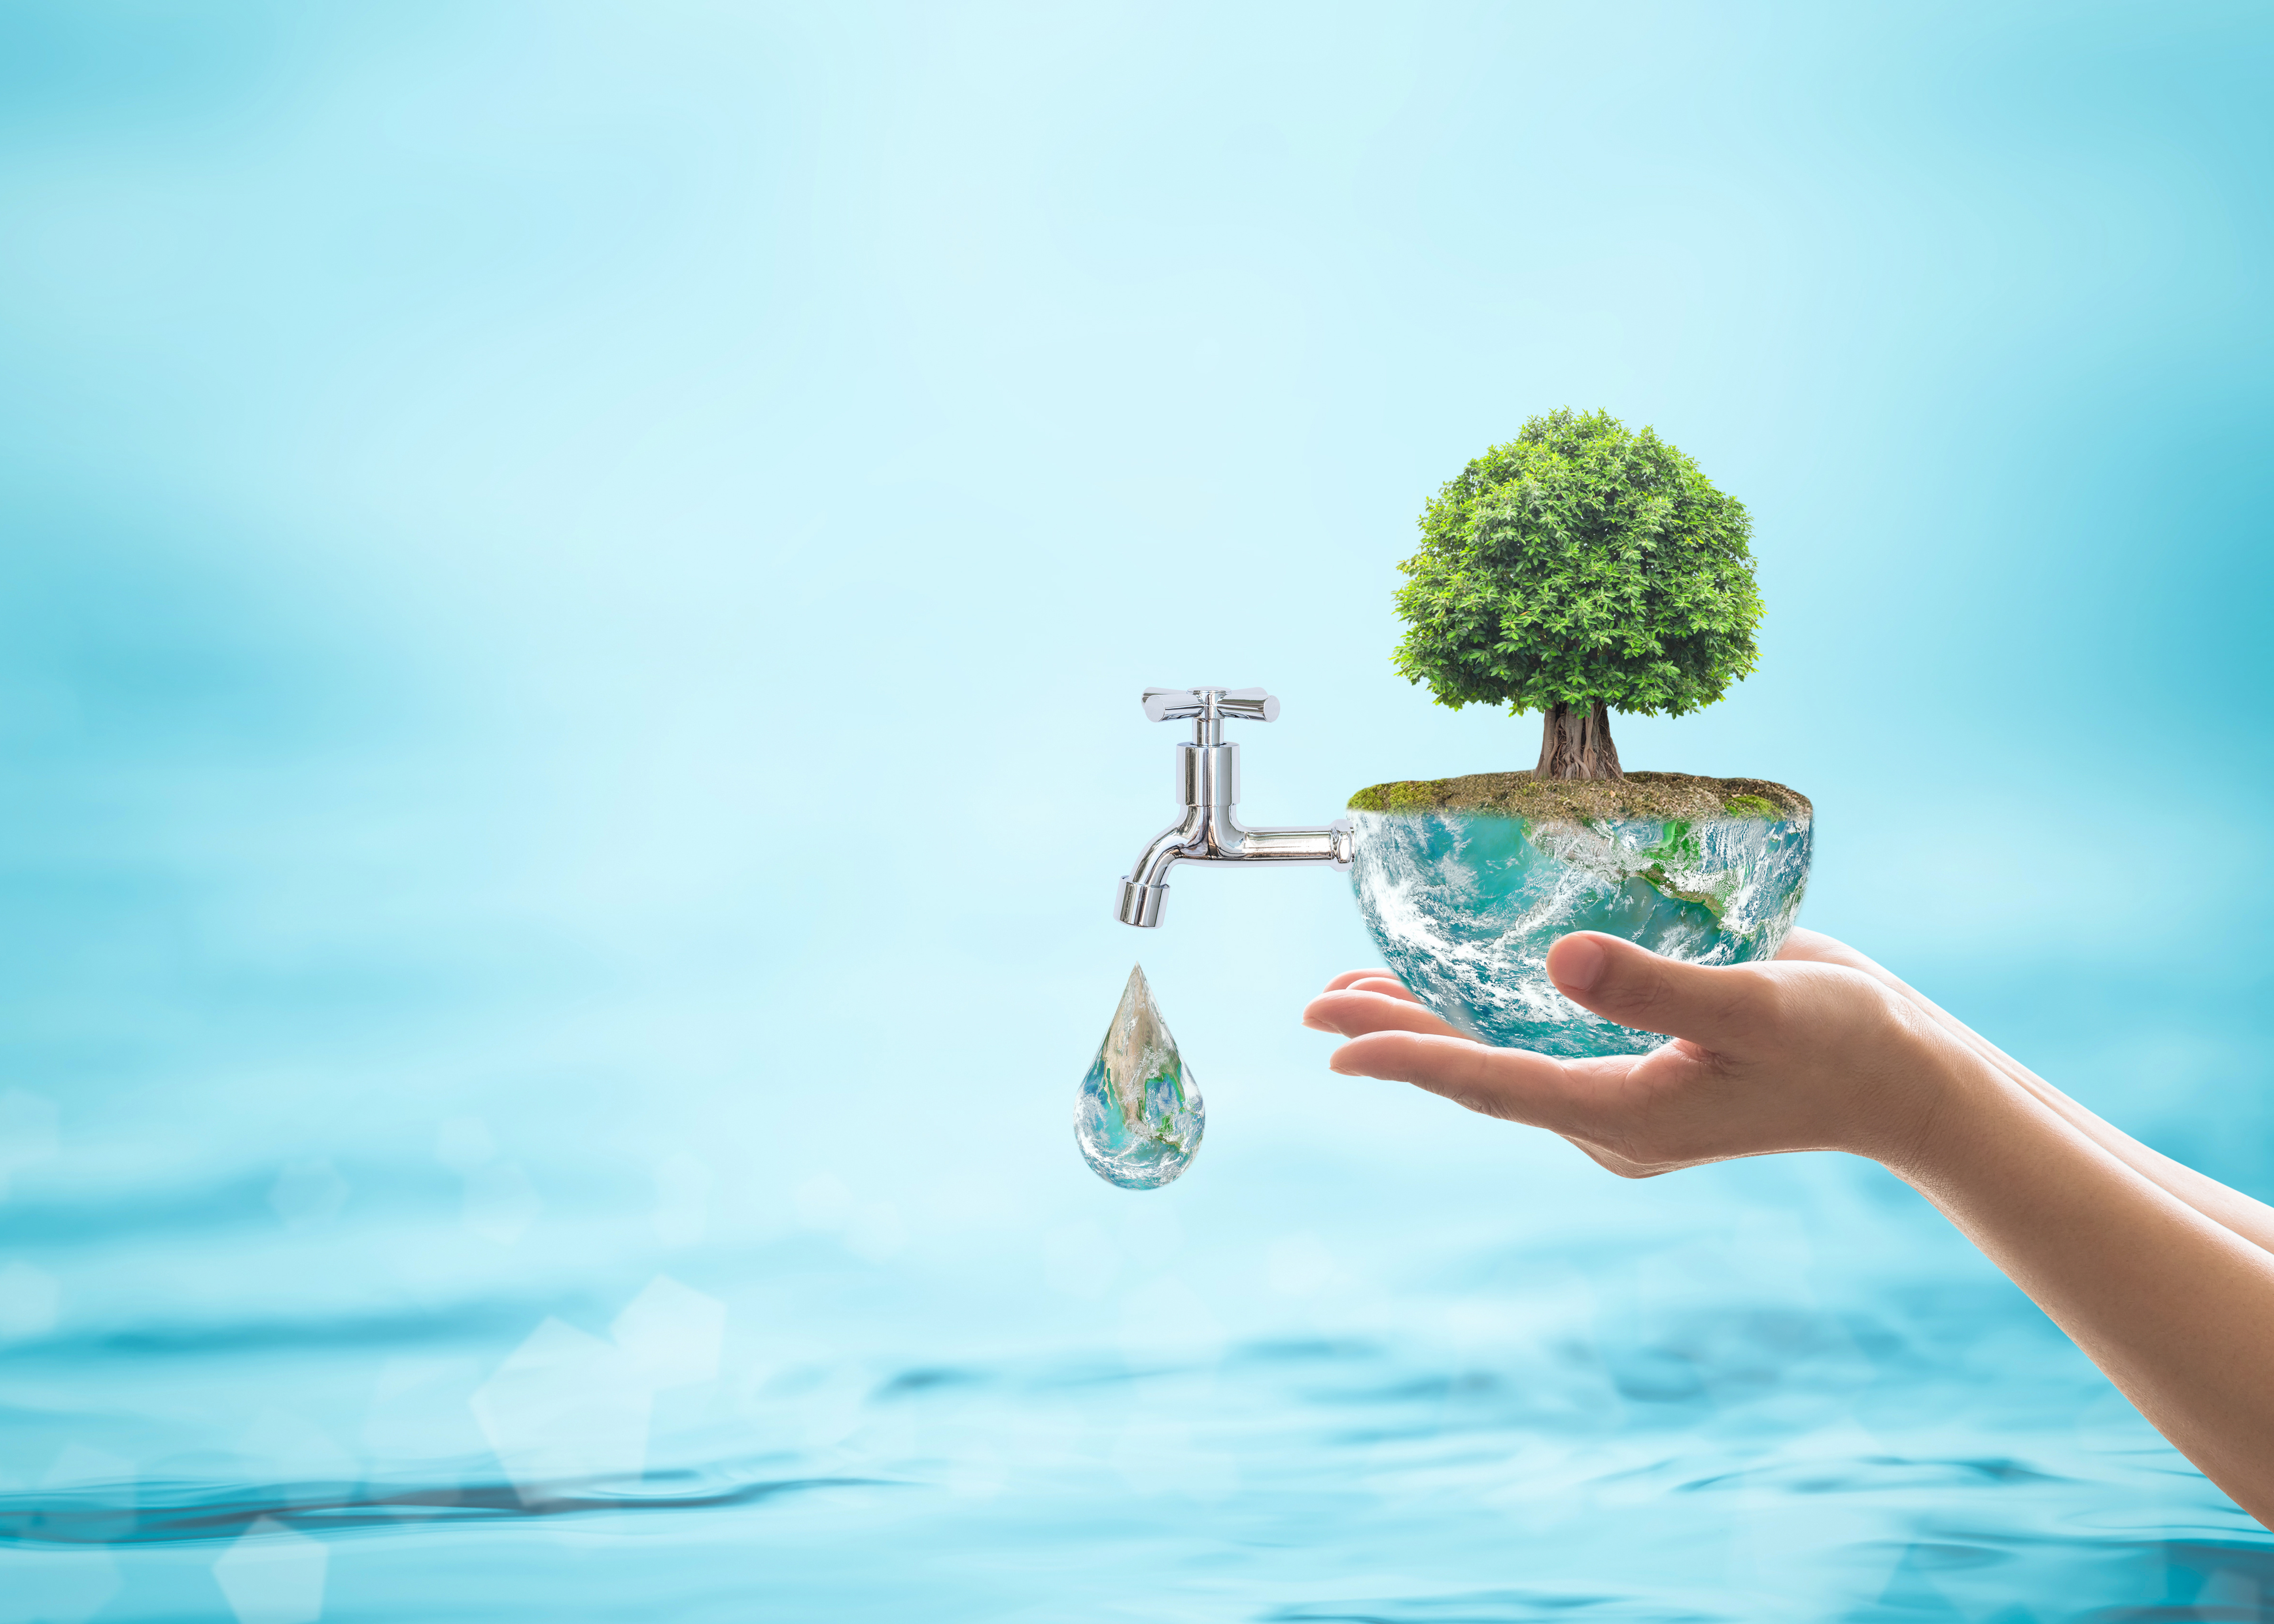 Water Softener Austin Texas - Water softeners help to conserve water